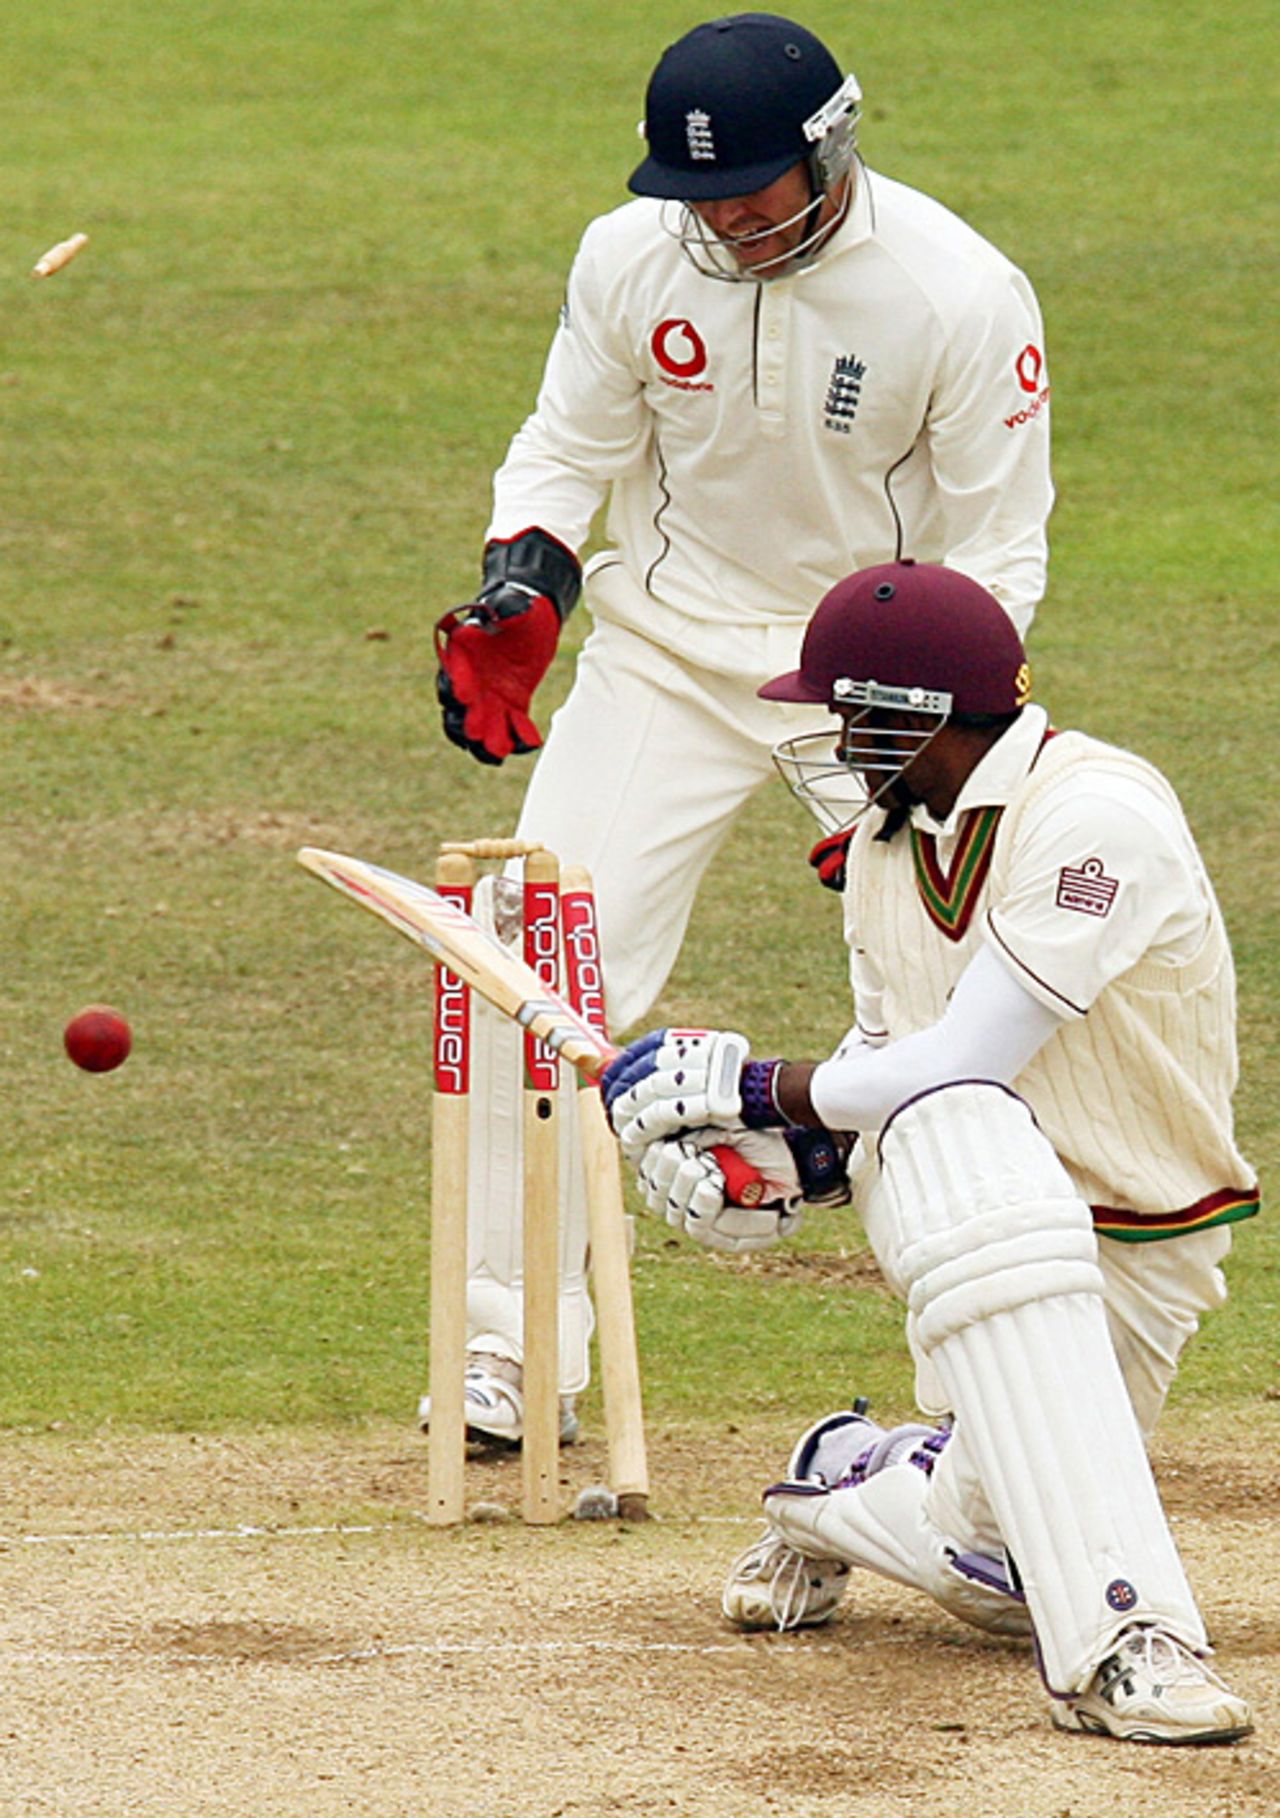 Shivnarine Chanderpaul is bowled by Monty Panesar, England v West Indies, 4th Test, Chester-le-Street, June 19, 2007